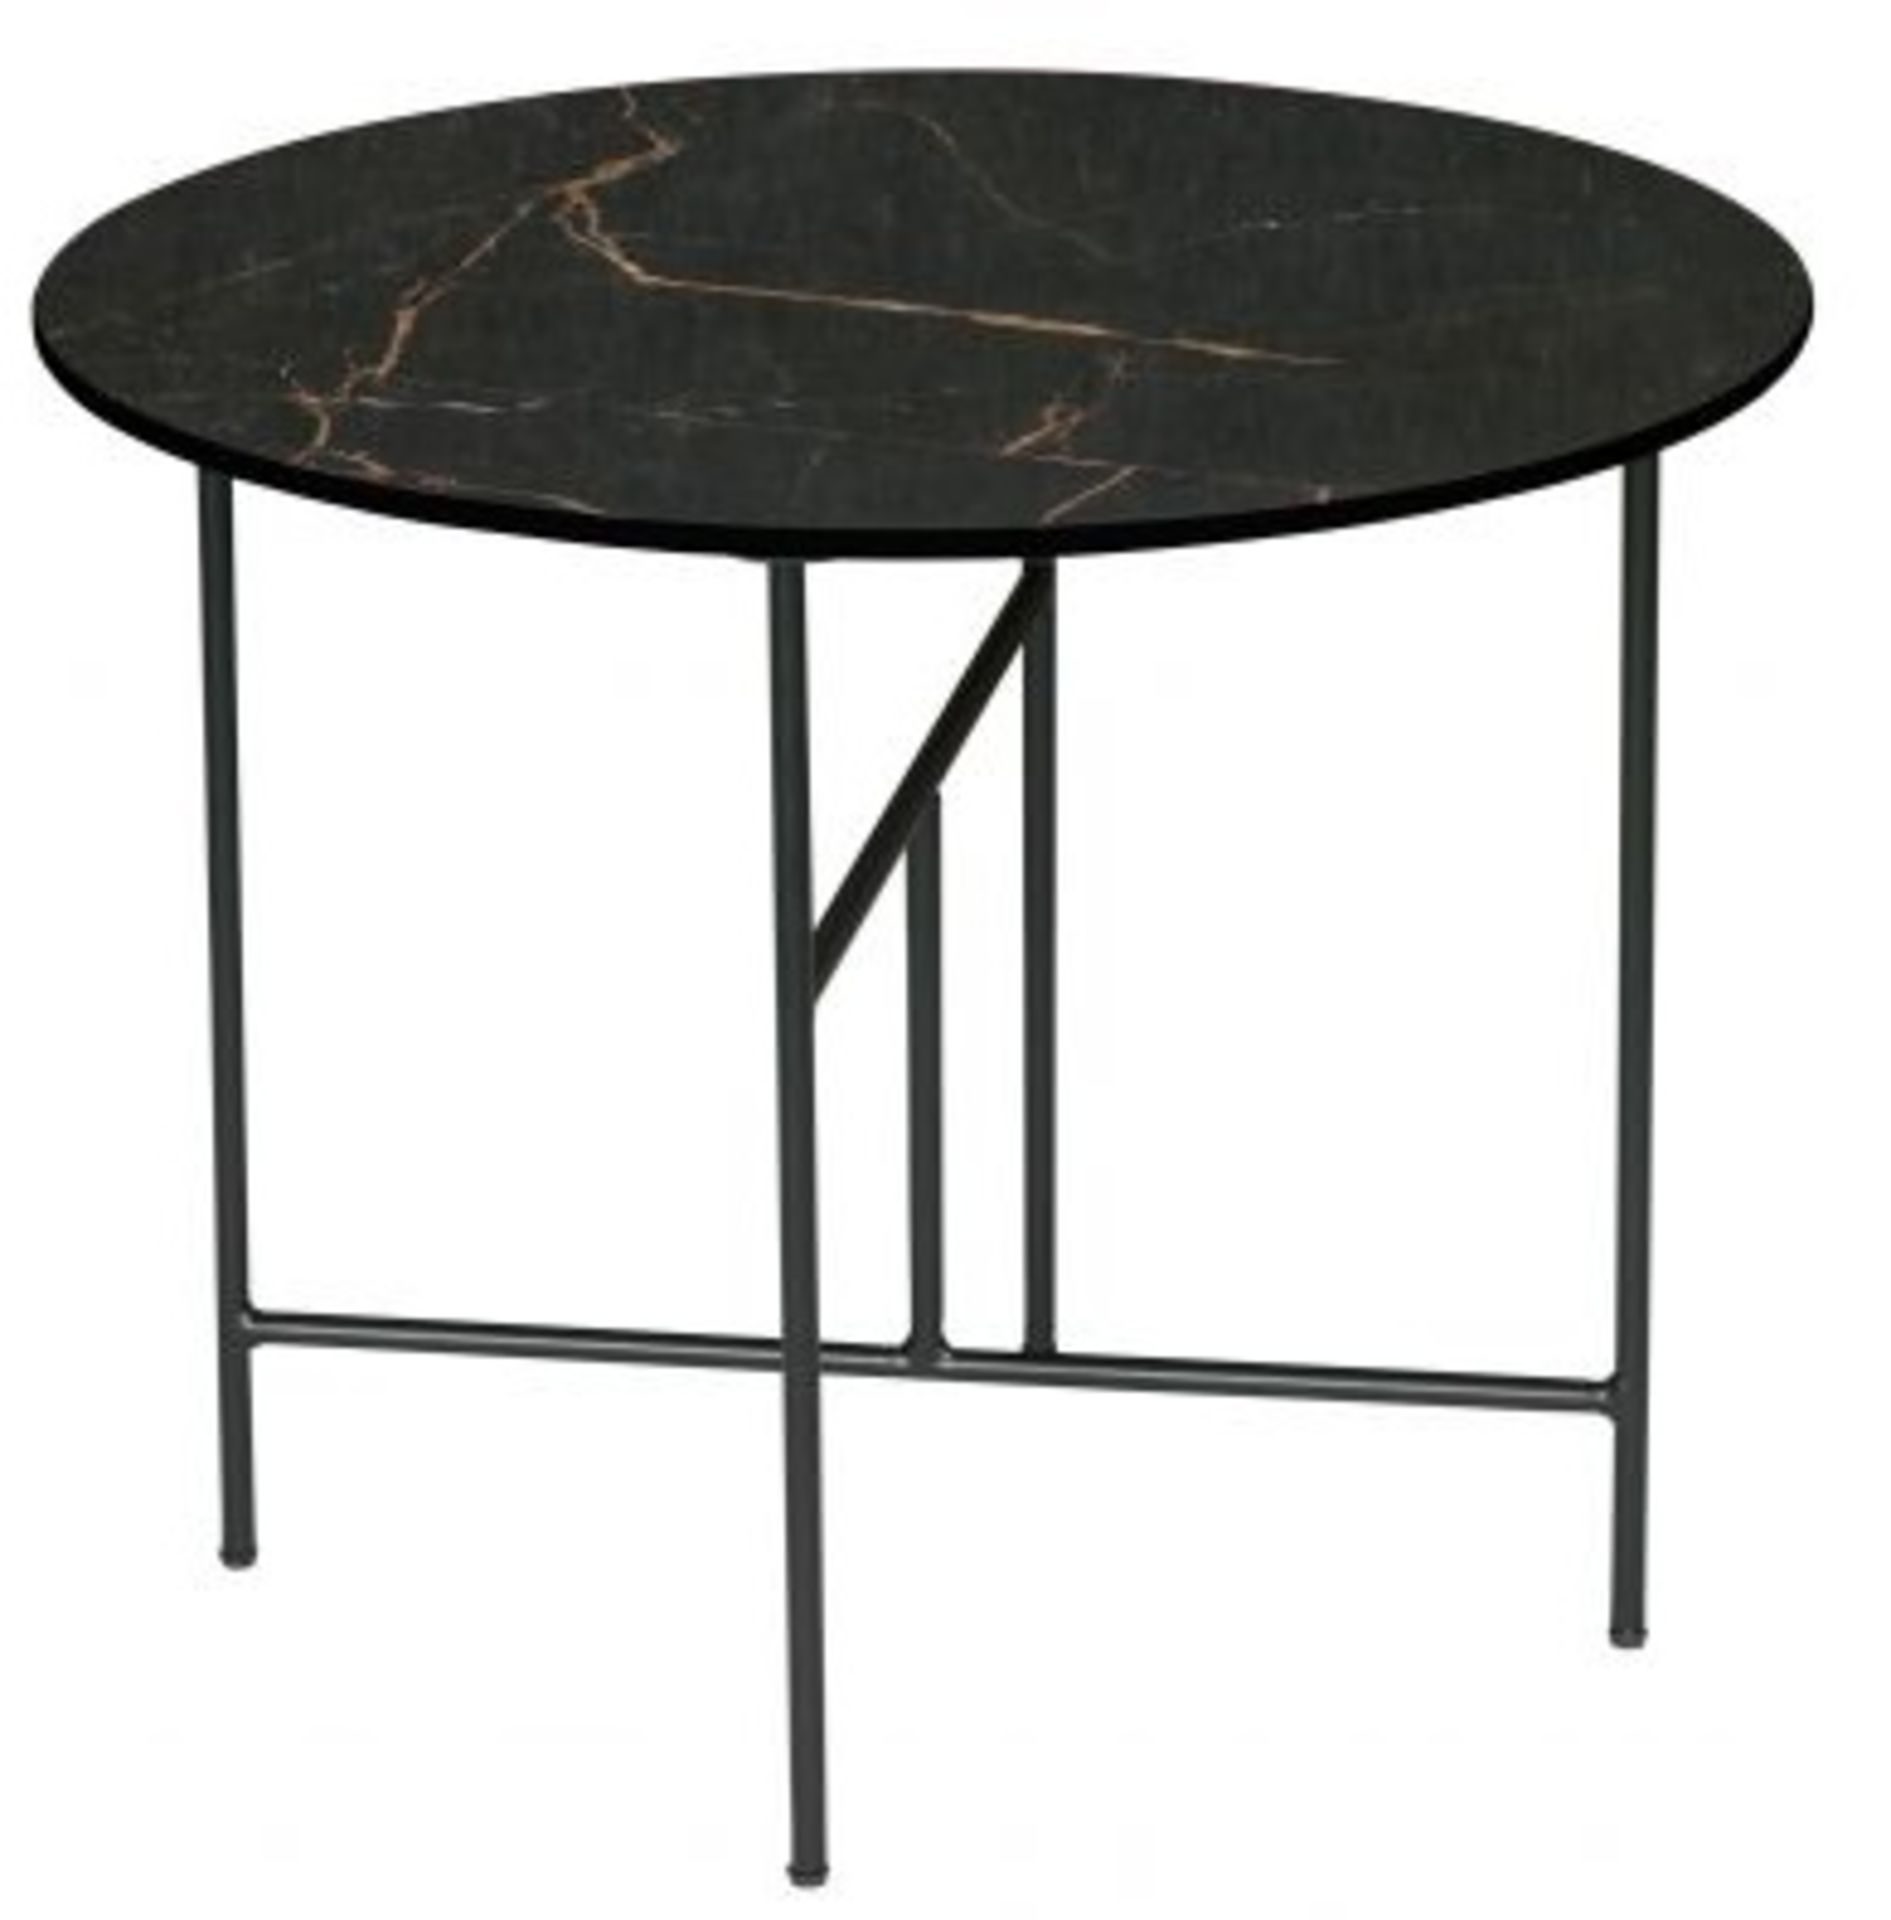 1 x VIDA Modern Round Coffee Table Featuring A Black Marbled Porcelain Tabletop - Produced By - Image 3 of 4